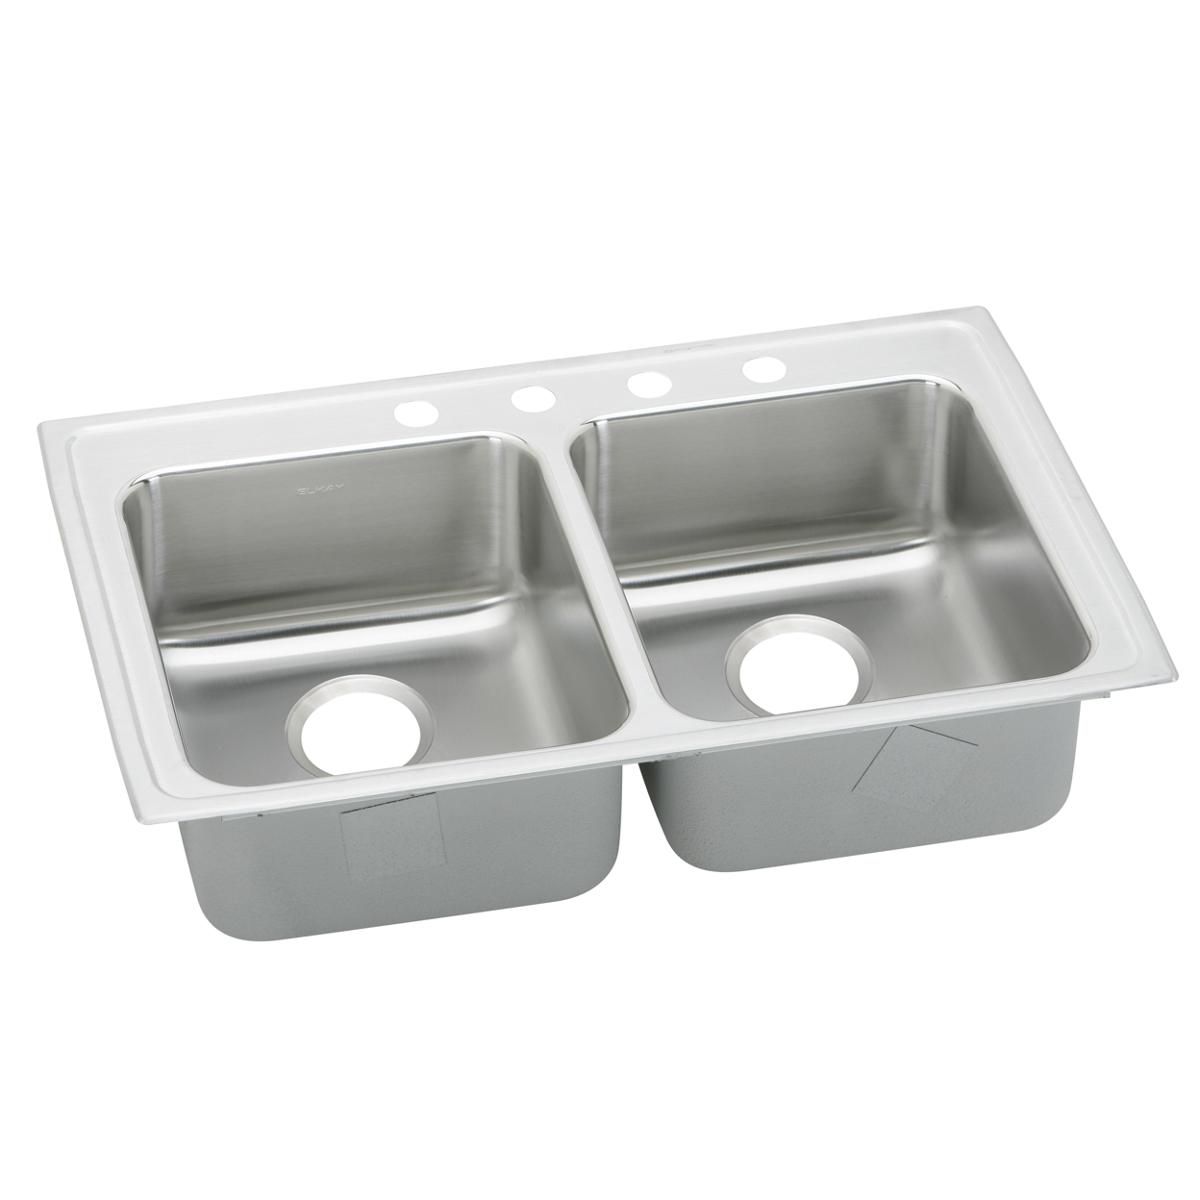 Elkay Lustertone Classic 33" x 19-1/2" x 5-1/2" MR2-Hole Equal Double Bowl Drop-in ADA Sink with Quick-clip